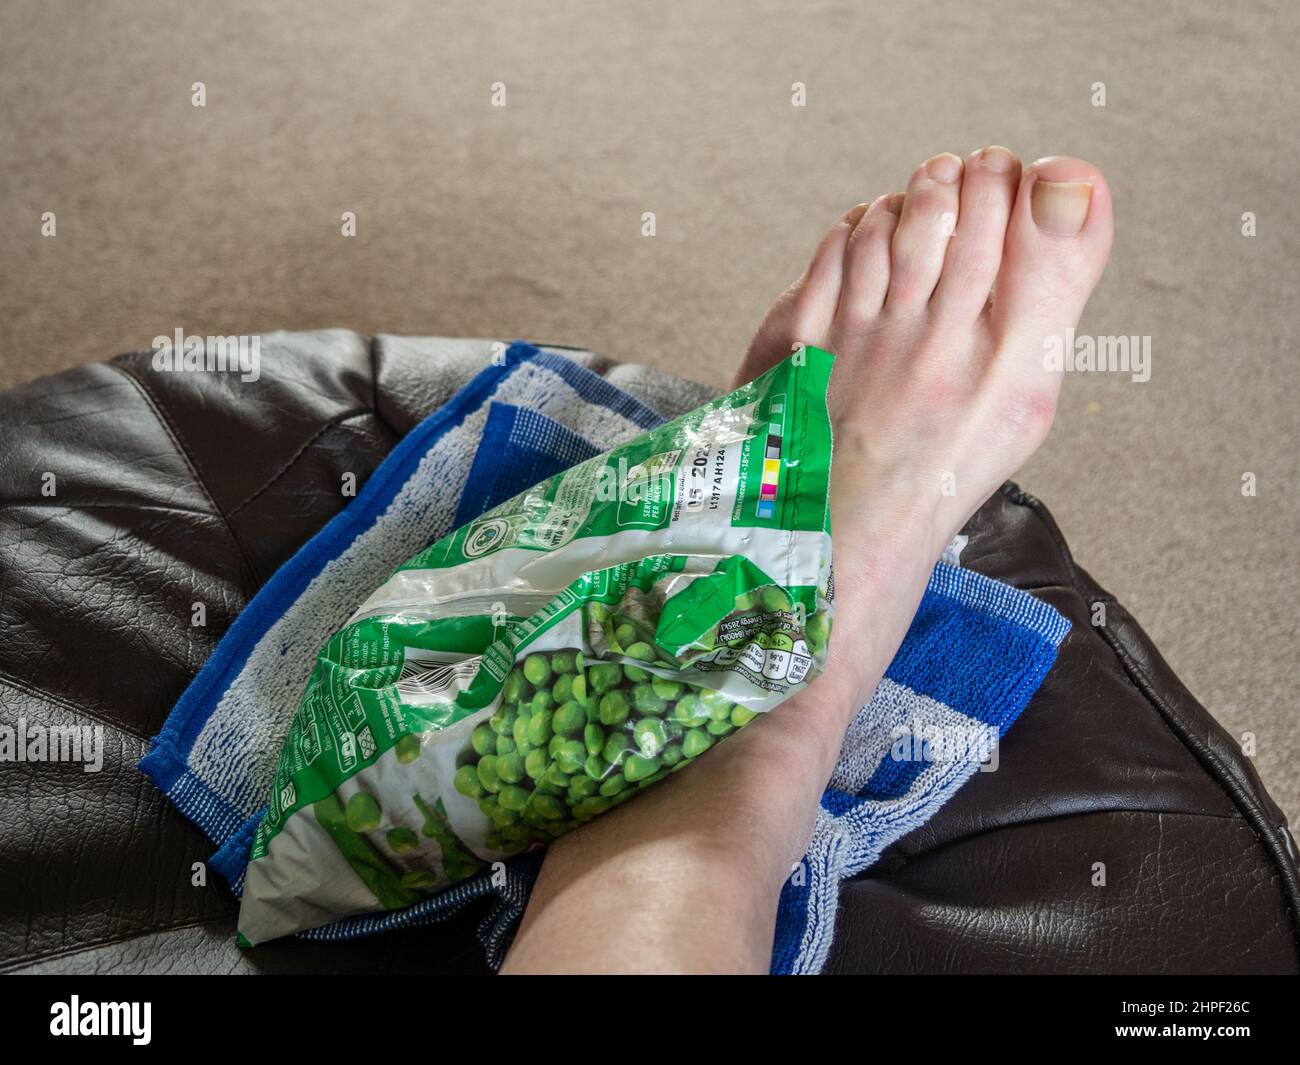 Man treating an ankle injury with a bag of frozen peas - part of the rest, ice, compression, elevation (or RICE) procedure, UK Stock Photo